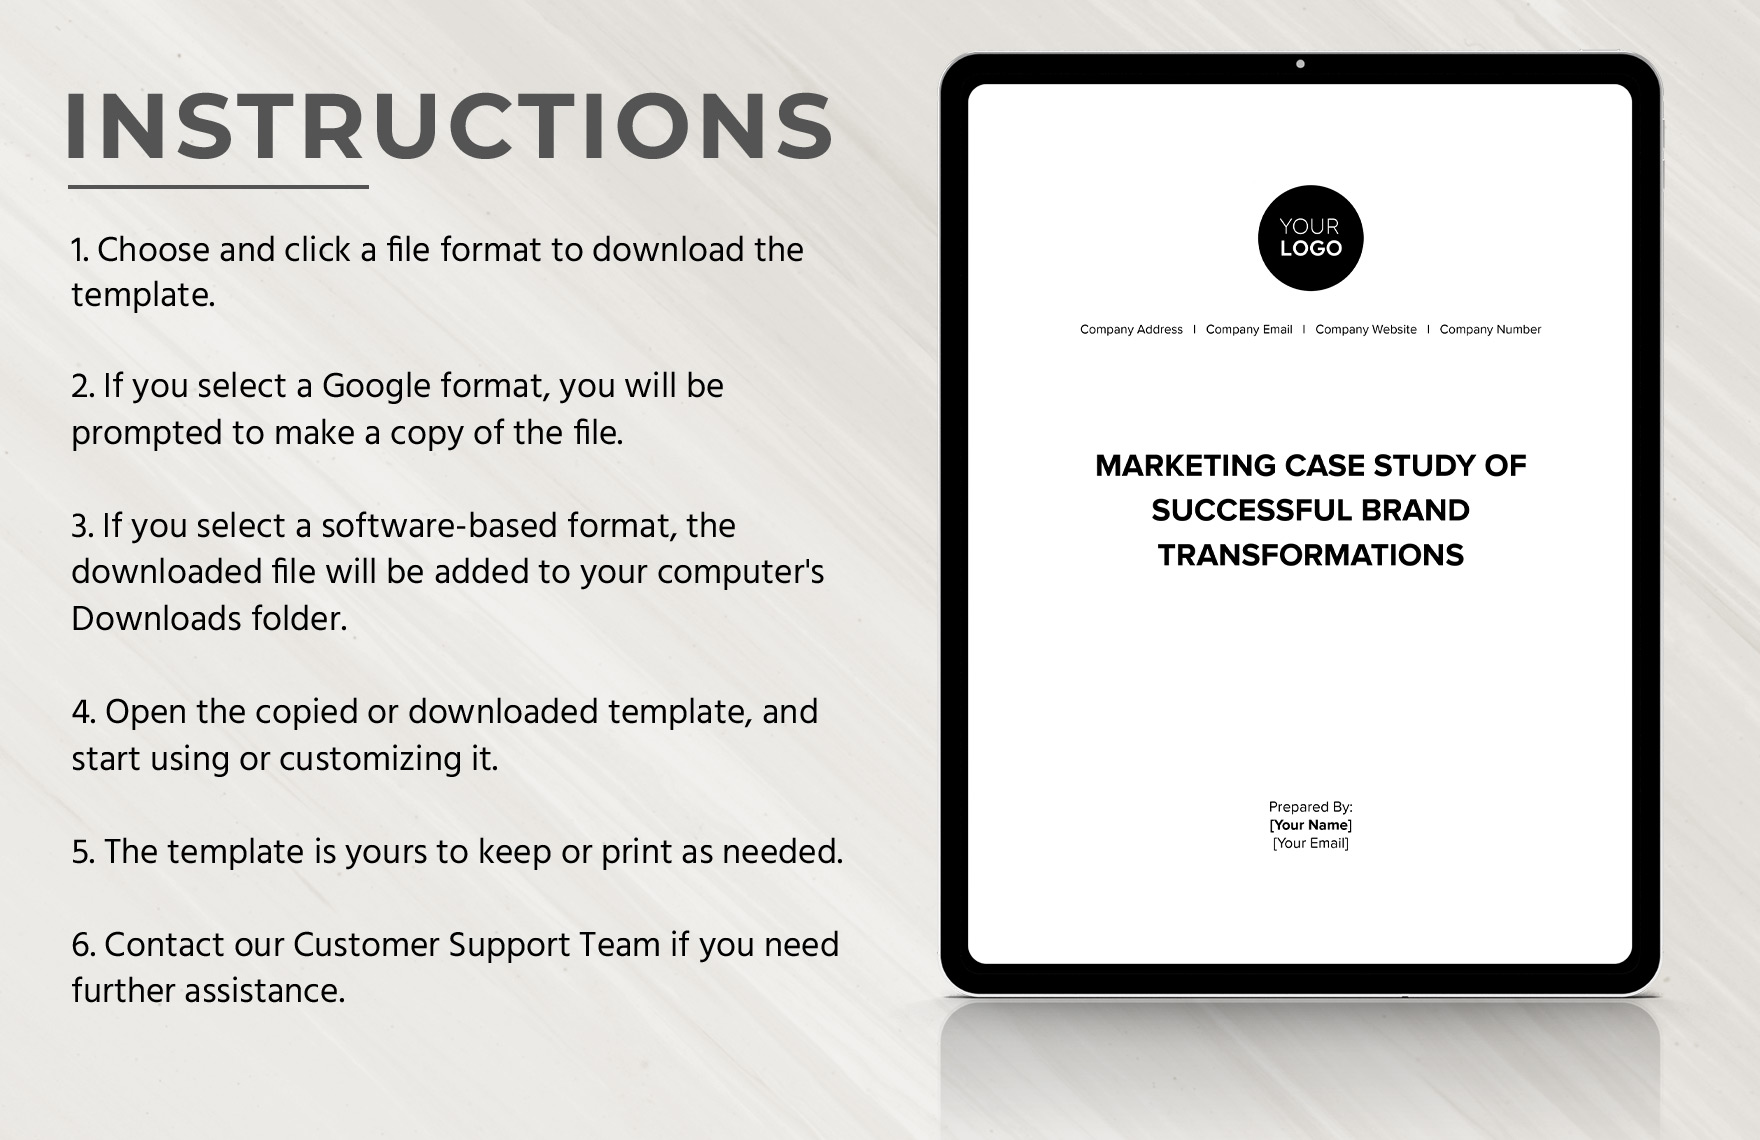 Marketing Case Study of Successful Brand Transformations Template